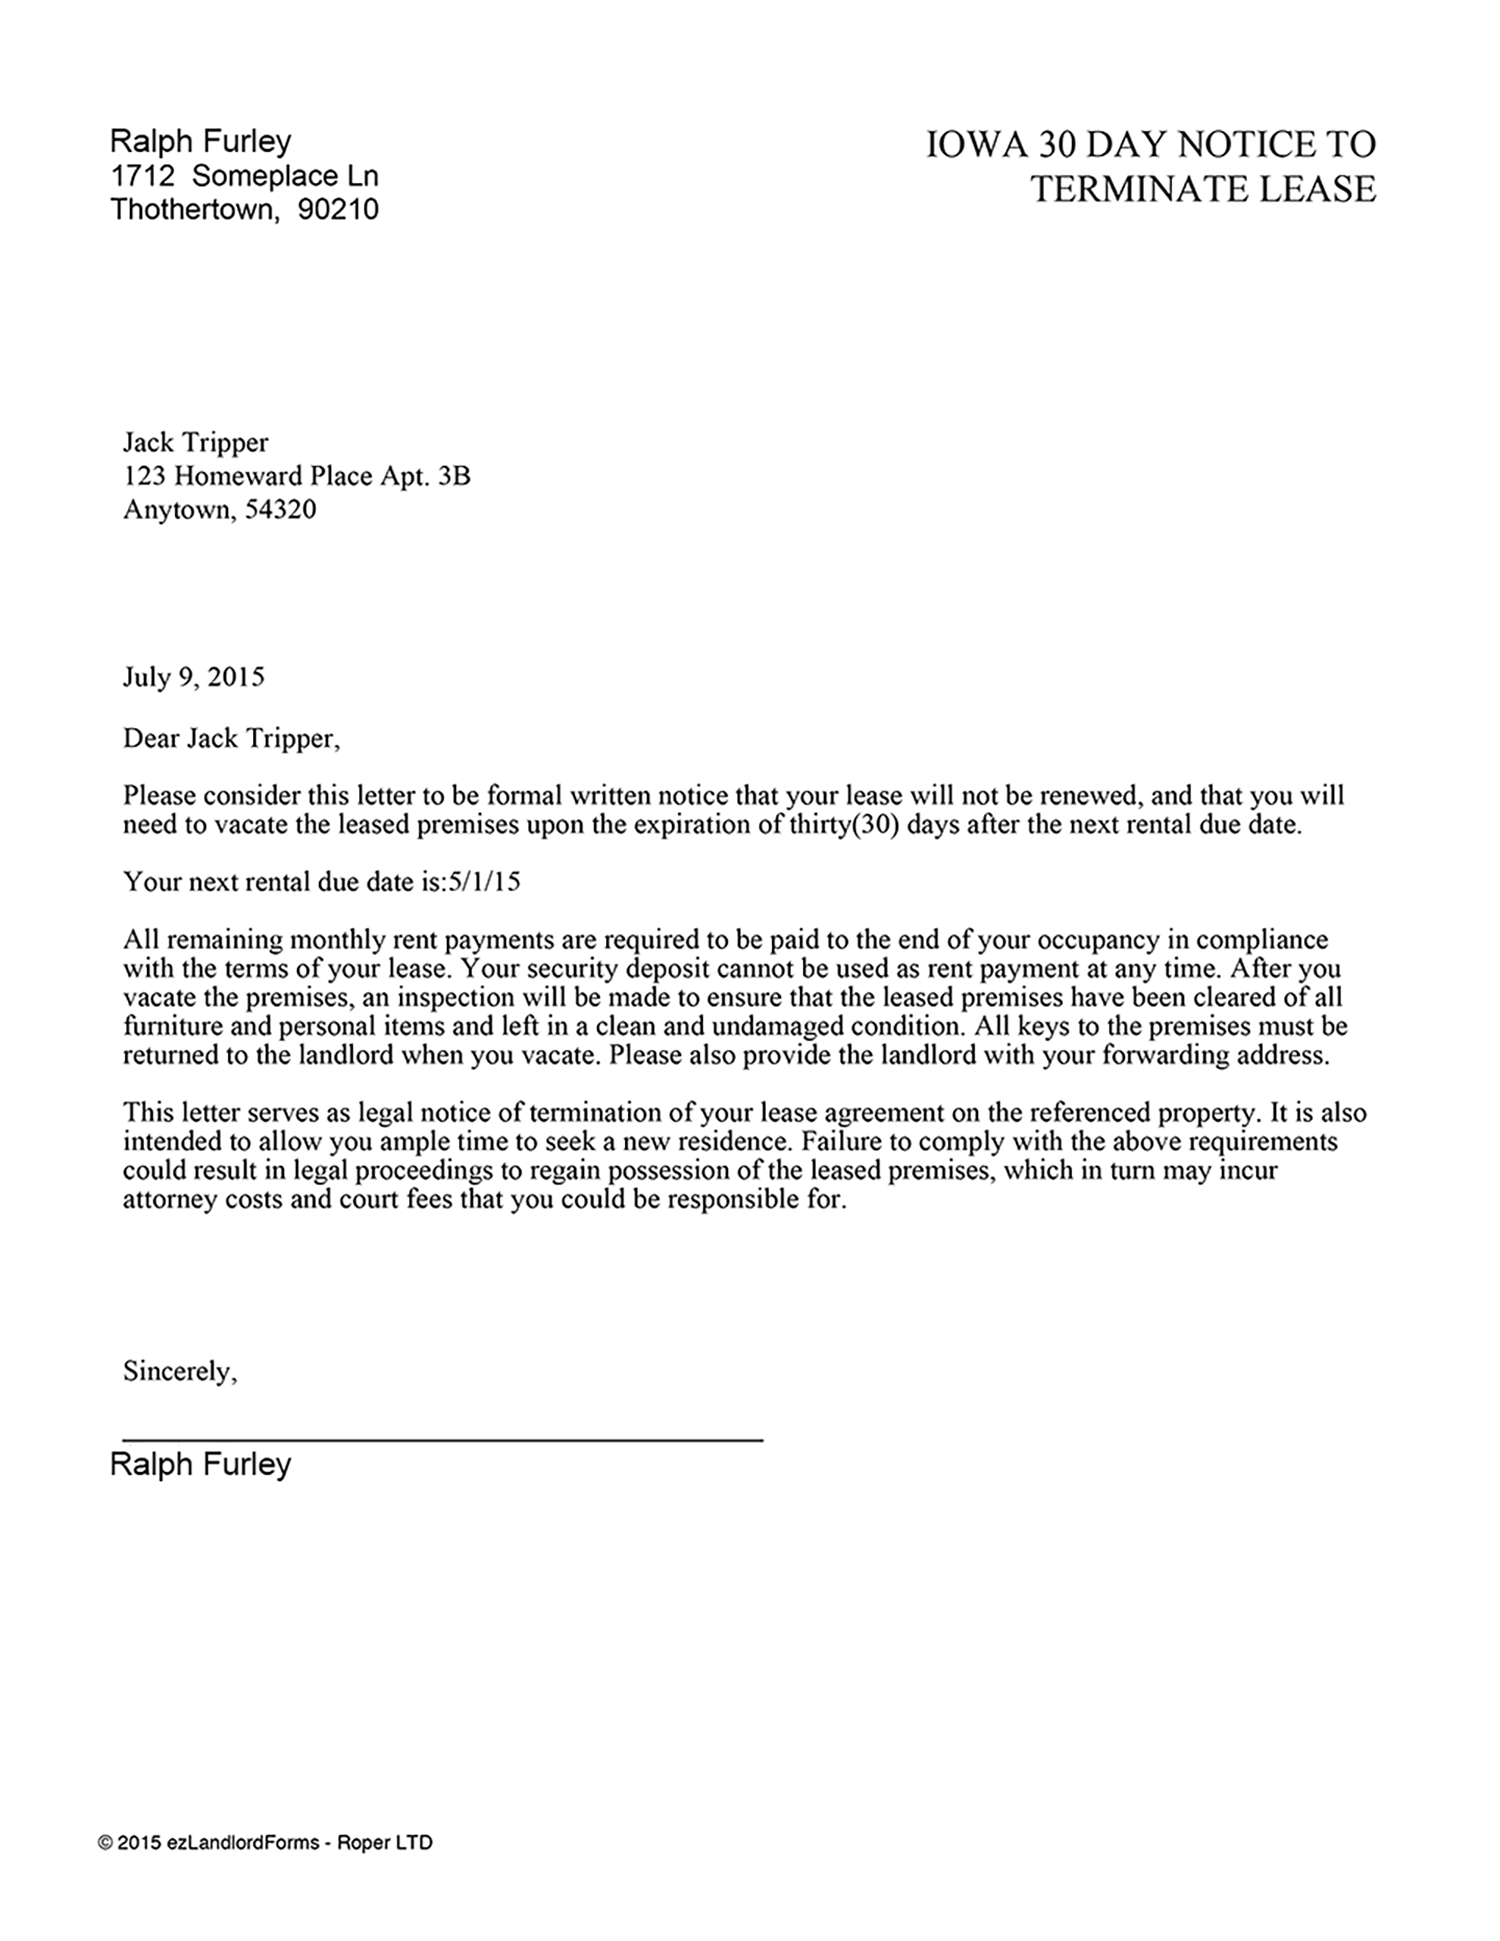 Sample Letter Termination Of Lease from www.ezlandlordforms.com